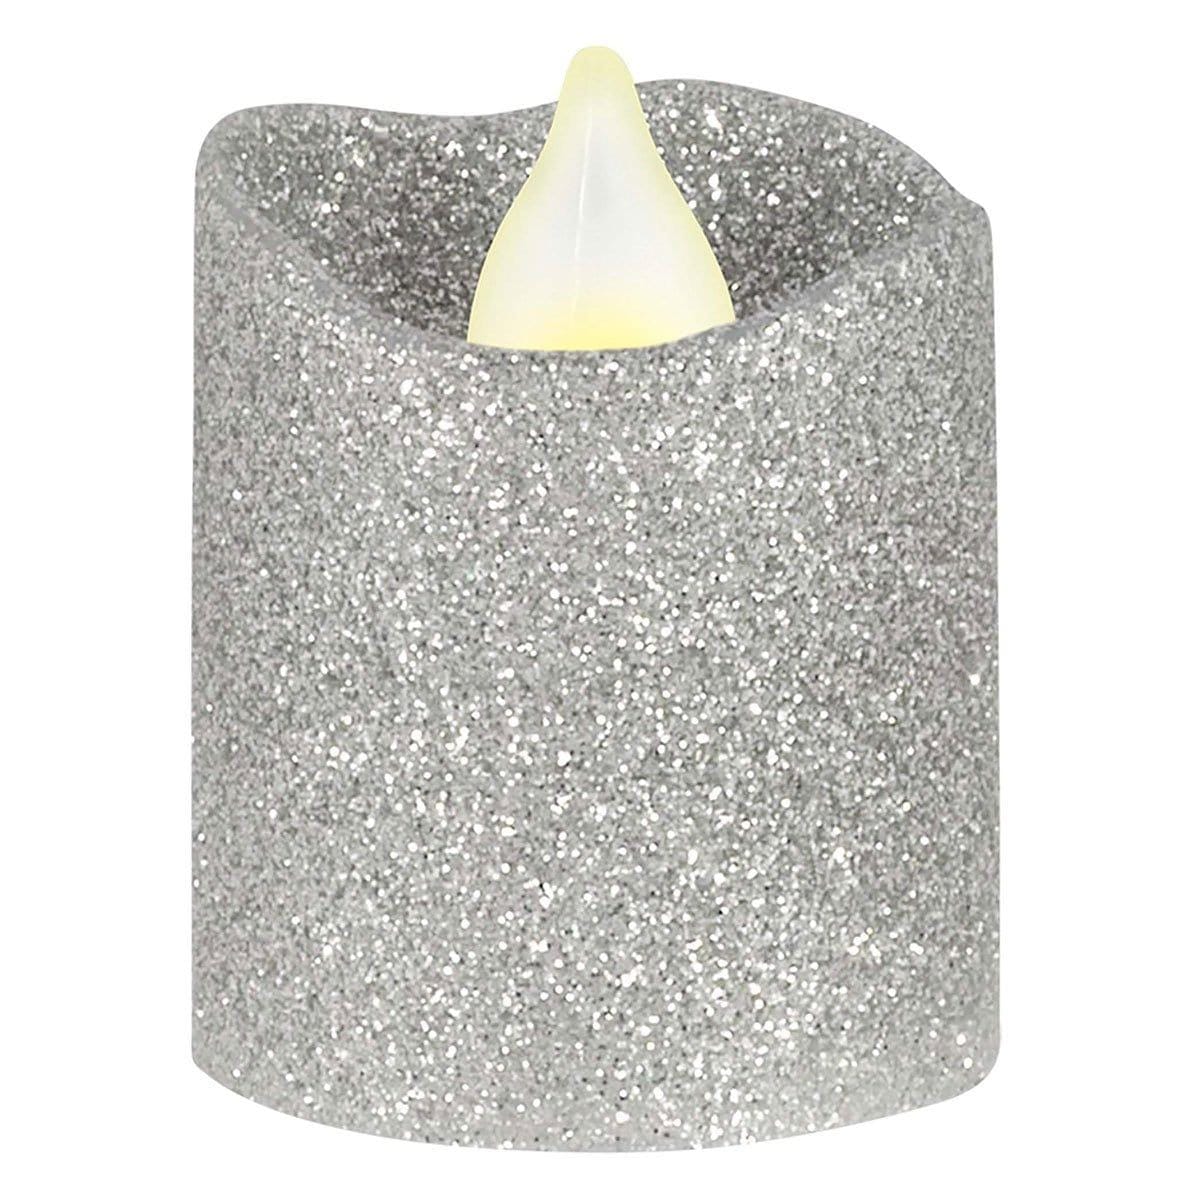 Buy Decorations LED Votives 6/pkg - Silver sold at Party Expert